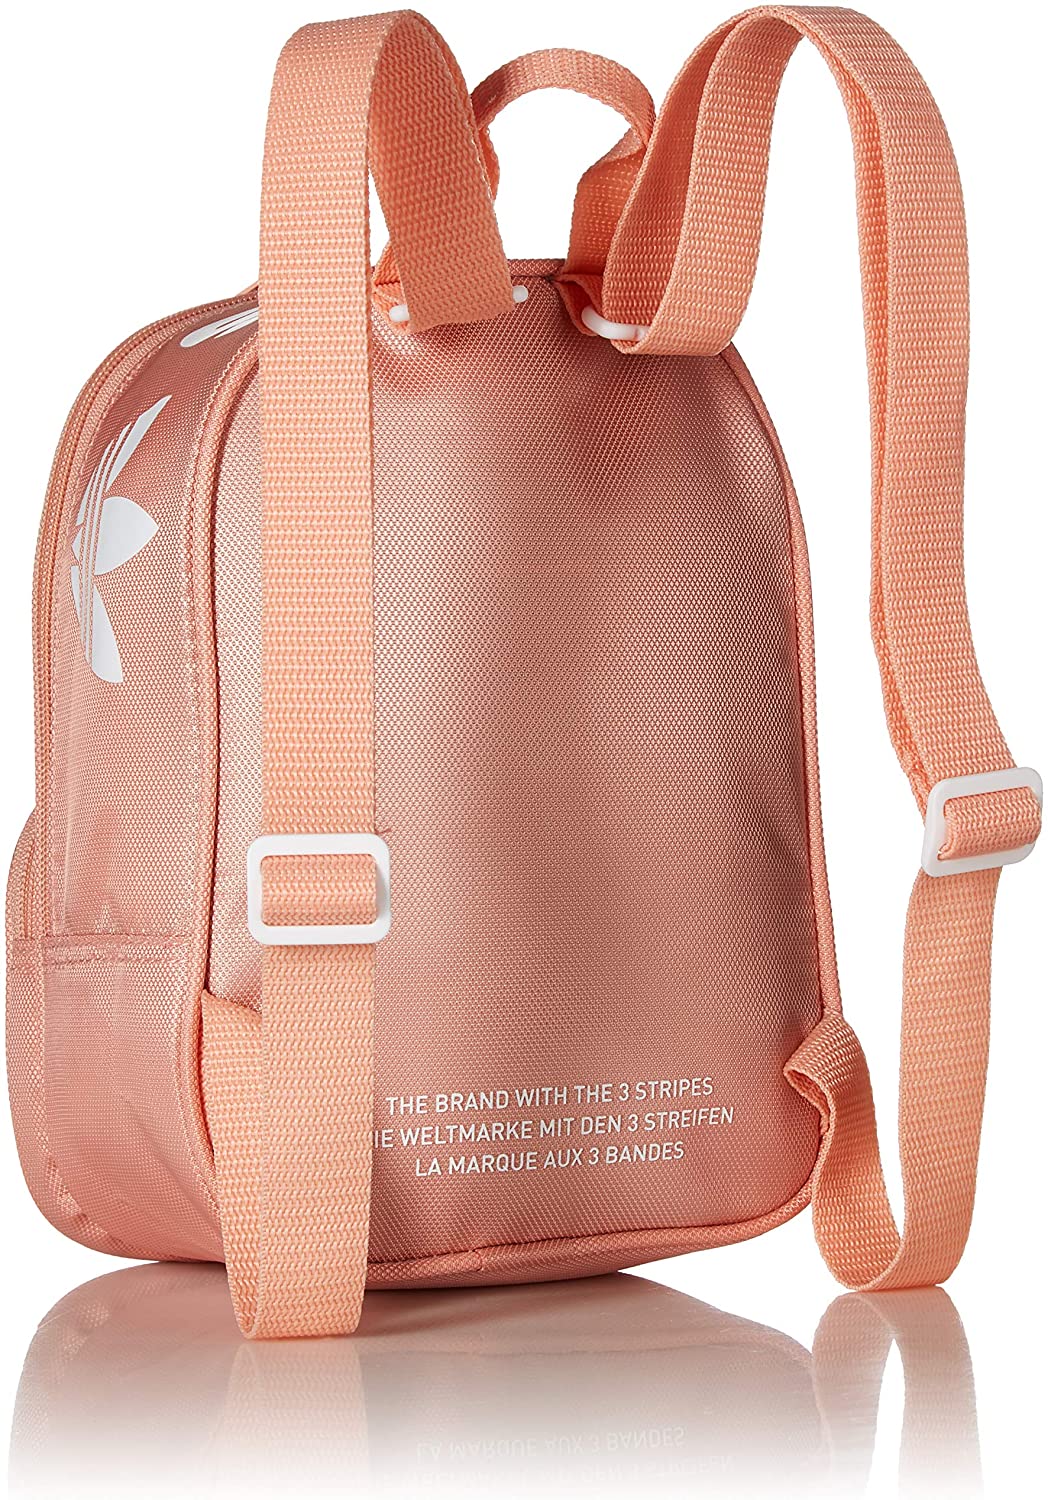 adidas Originals Women's Santiago Mini Backpack, Dust Pink, One Size One Size Dust Pink - image 2 of 7